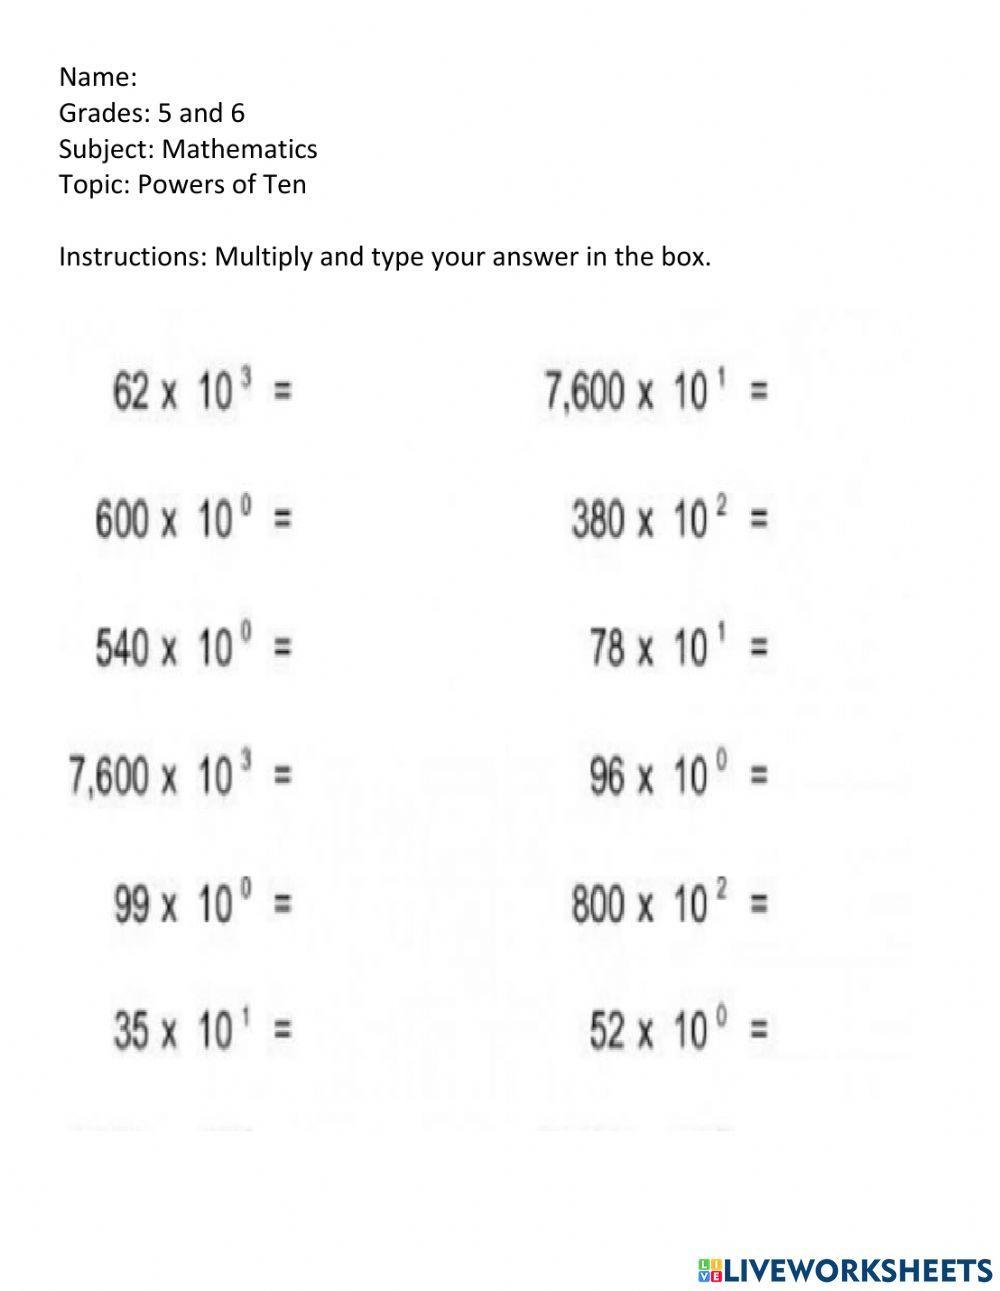 Powers of Ten exercise | Live Worksheets